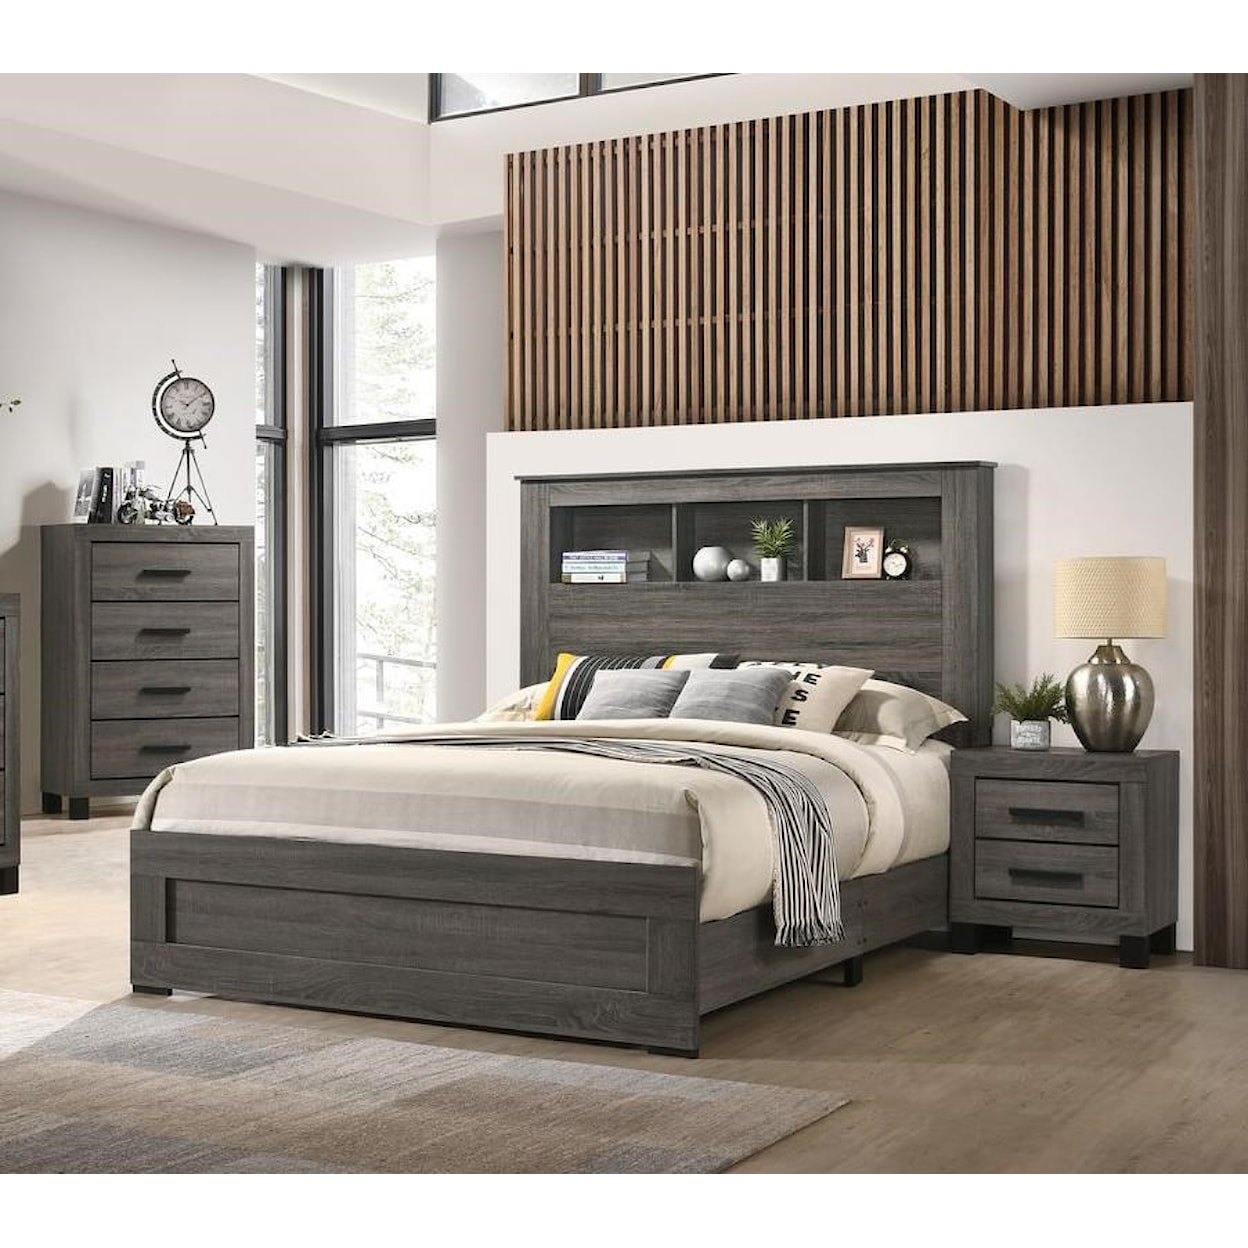 Lifestyle 8321 5 Piece Full Bookcase Bedroom Group